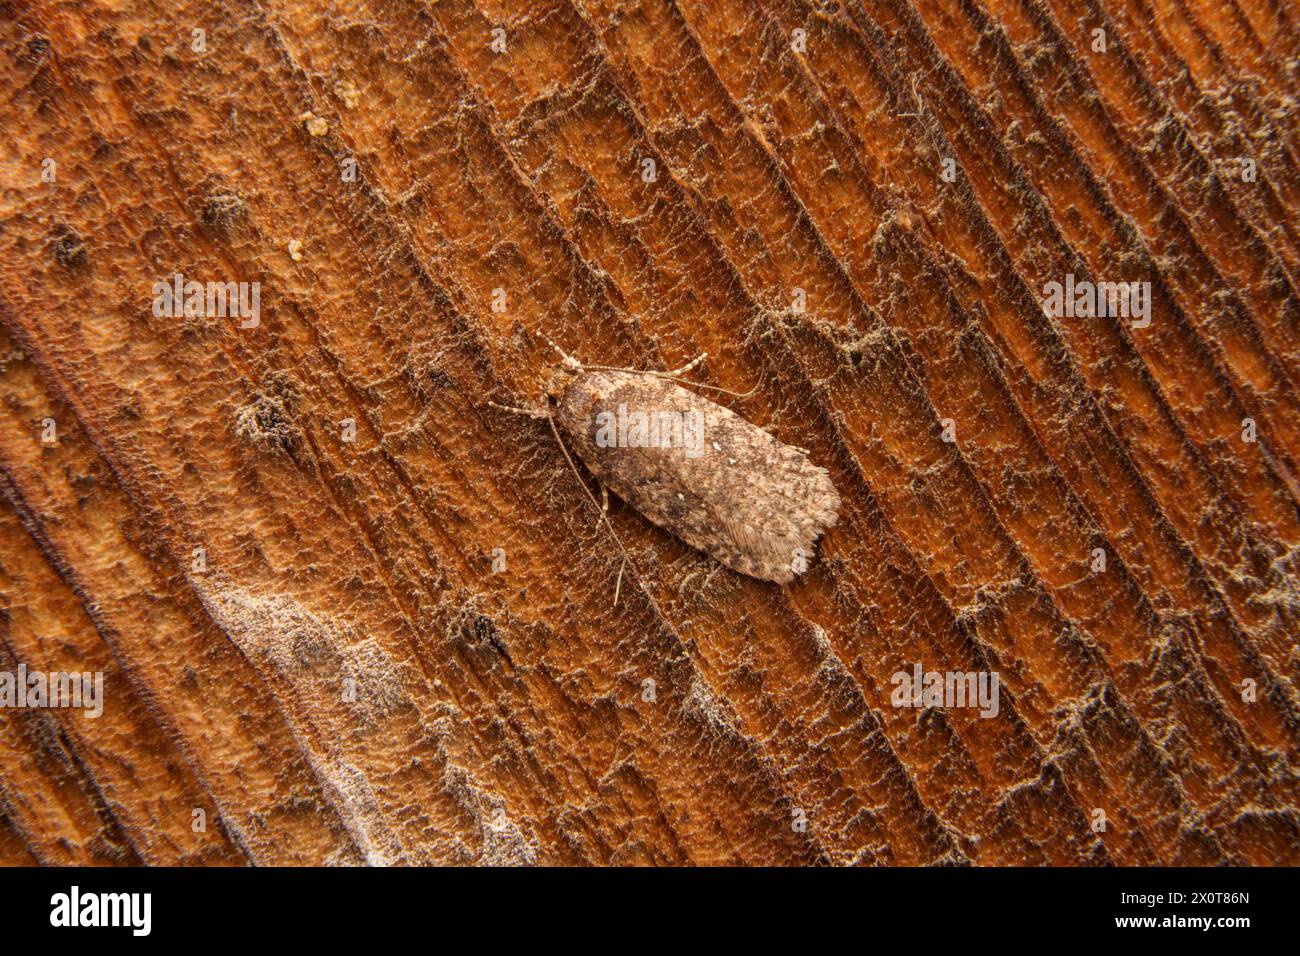 Agonopterix heracliana Family Depressariidae Genus Agonopterix Common Brindled Brown moth Common Flat-body moth wild nature insect photography Stock Photo